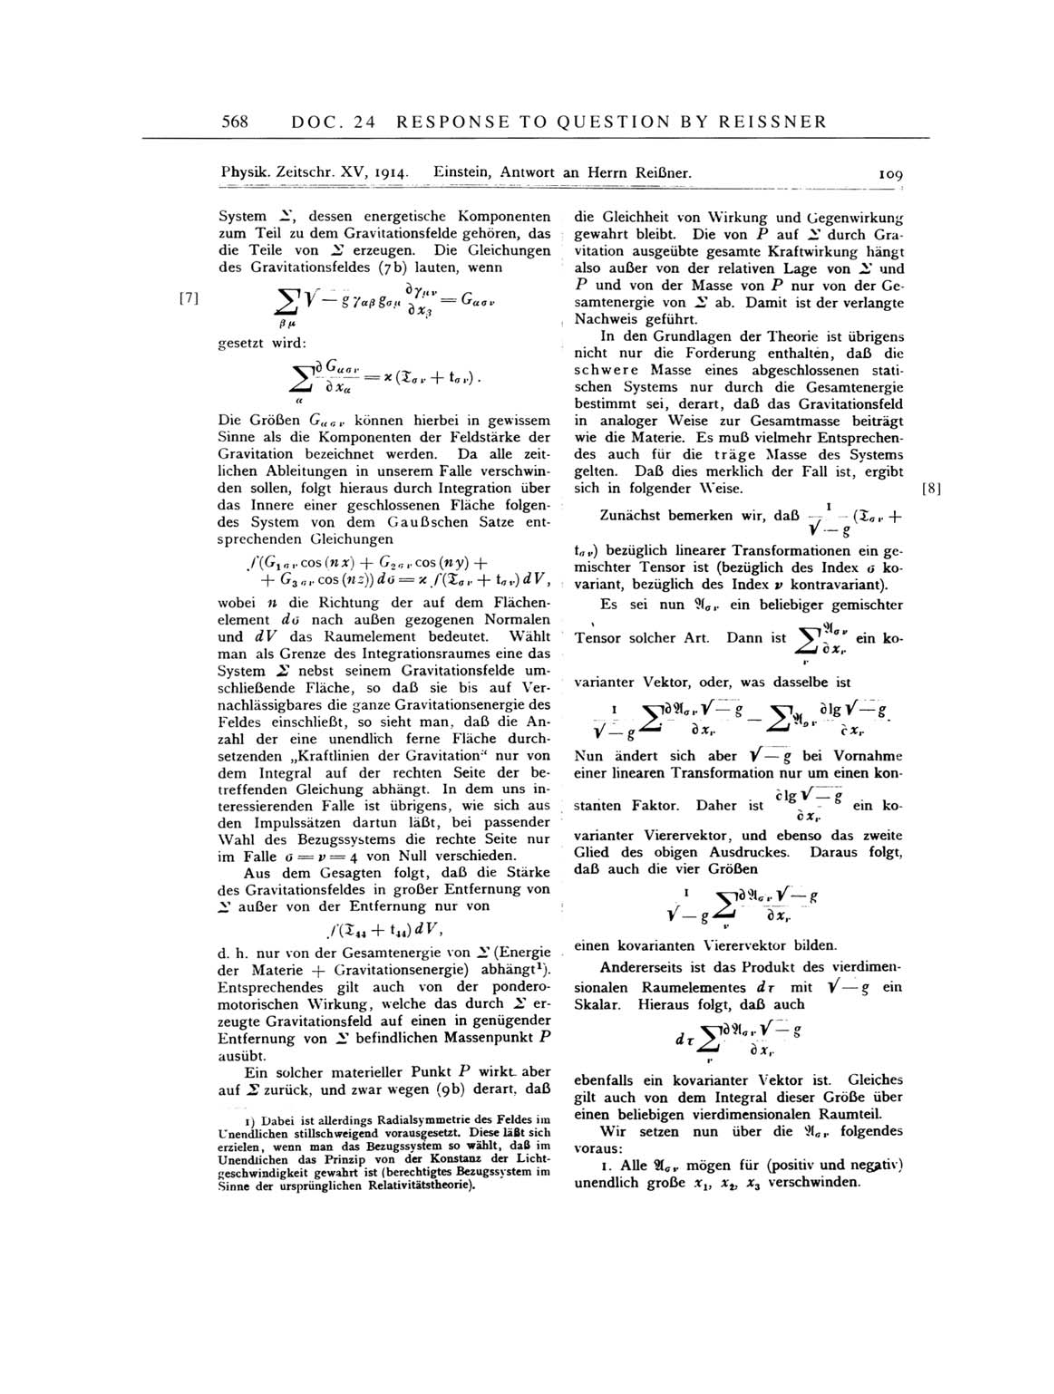 Volume 4: The Swiss Years: Writings 1912-1914 page 568